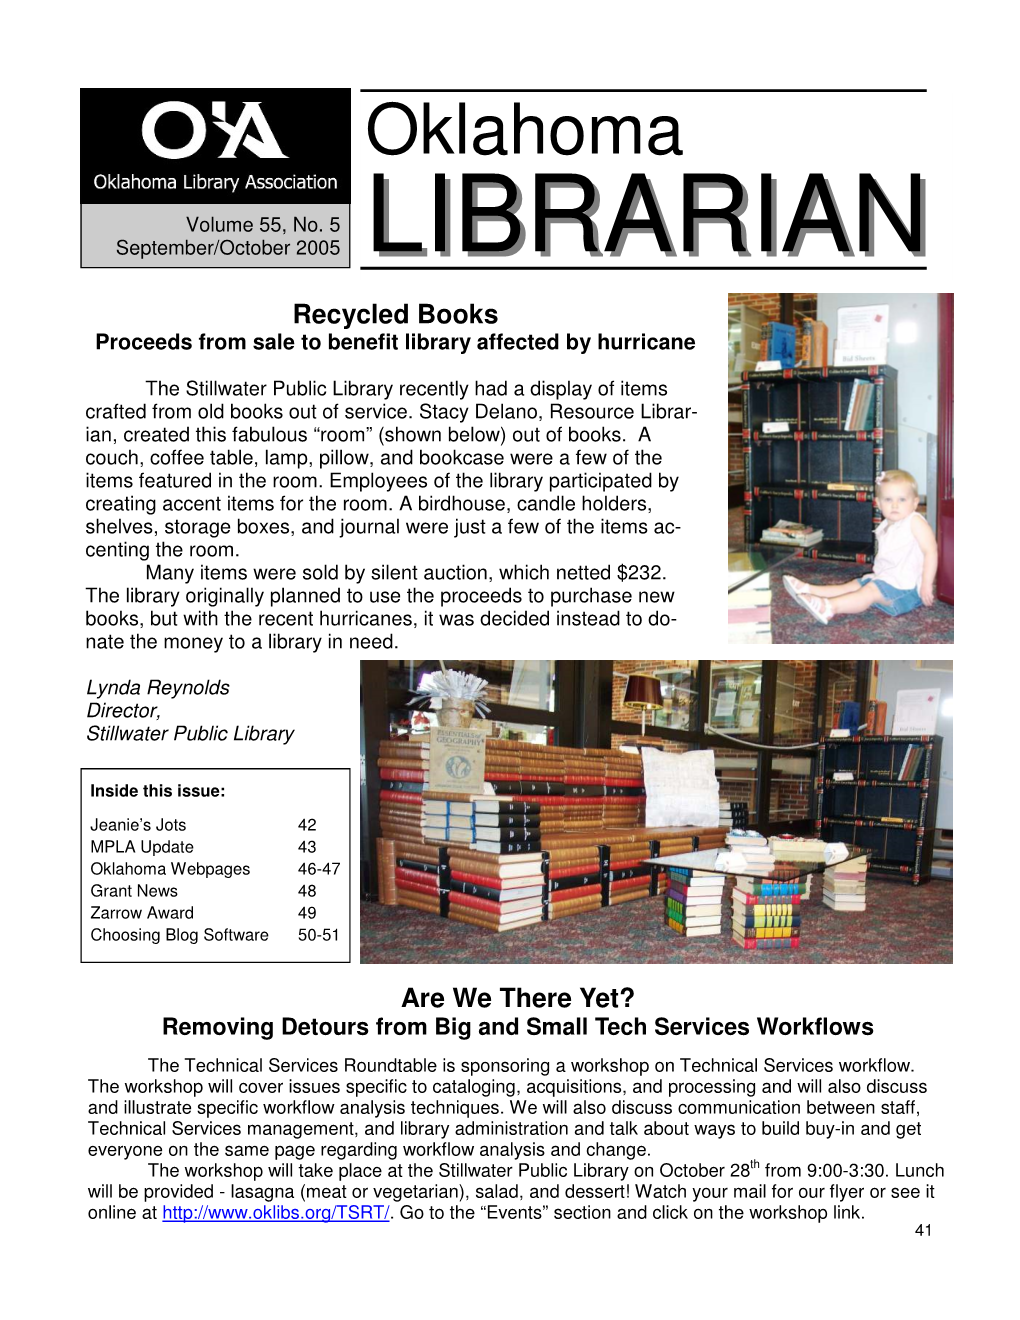 OKLAHOMA LIBRARIAN Is the Official Bul- Letin of the Oklahoma Library Association